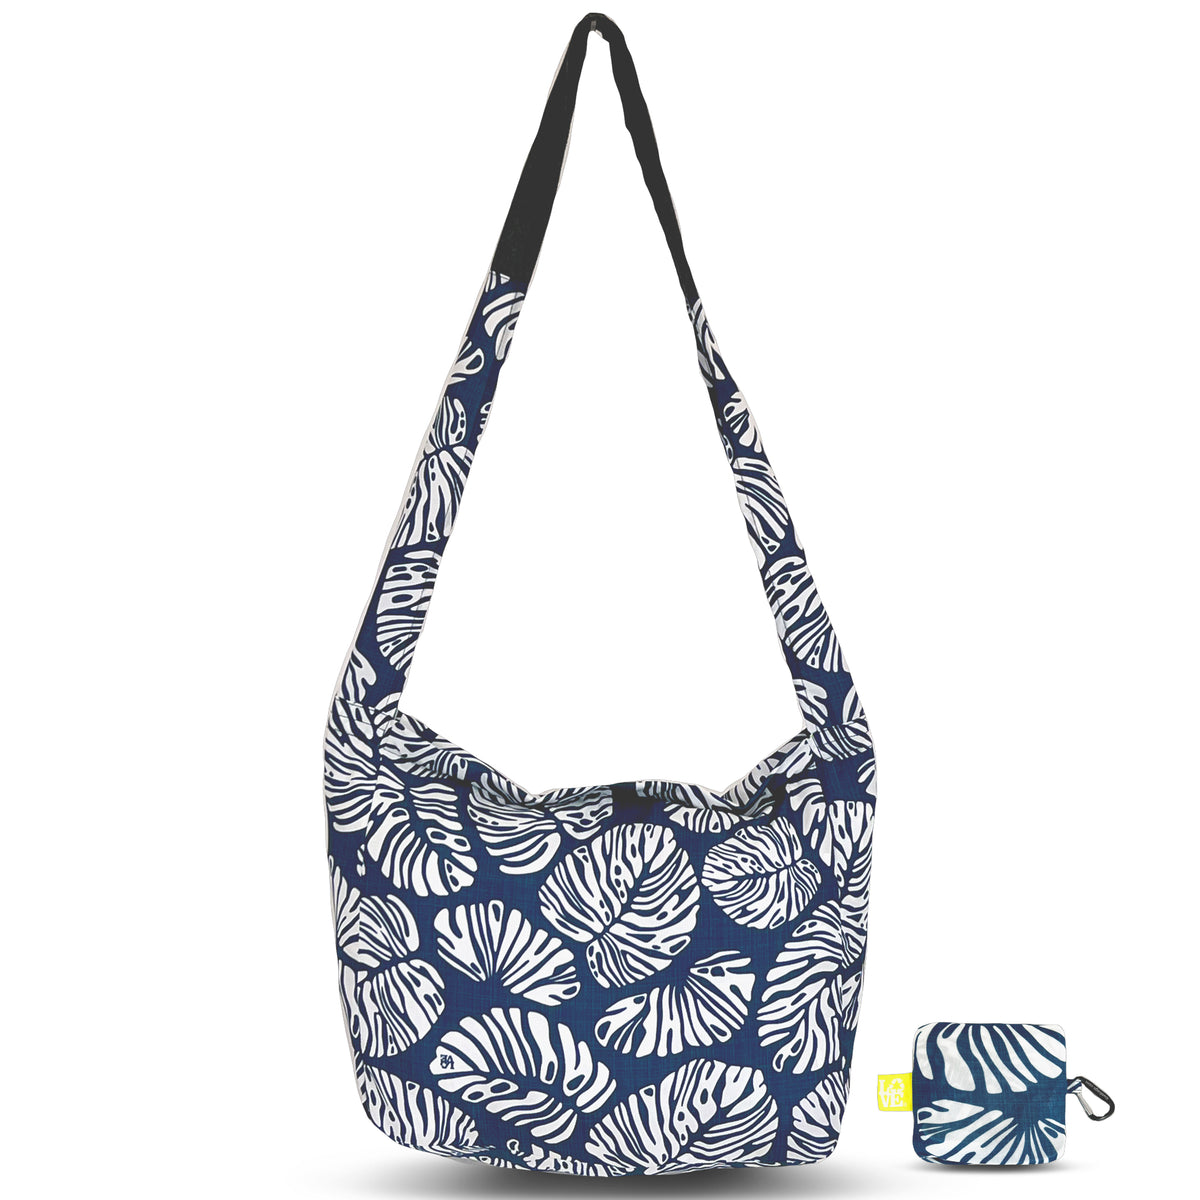 CROSSBODY STASH IT Tote Bag  -  TURTLE BAY (WITH EXTRA LONG STRAP)